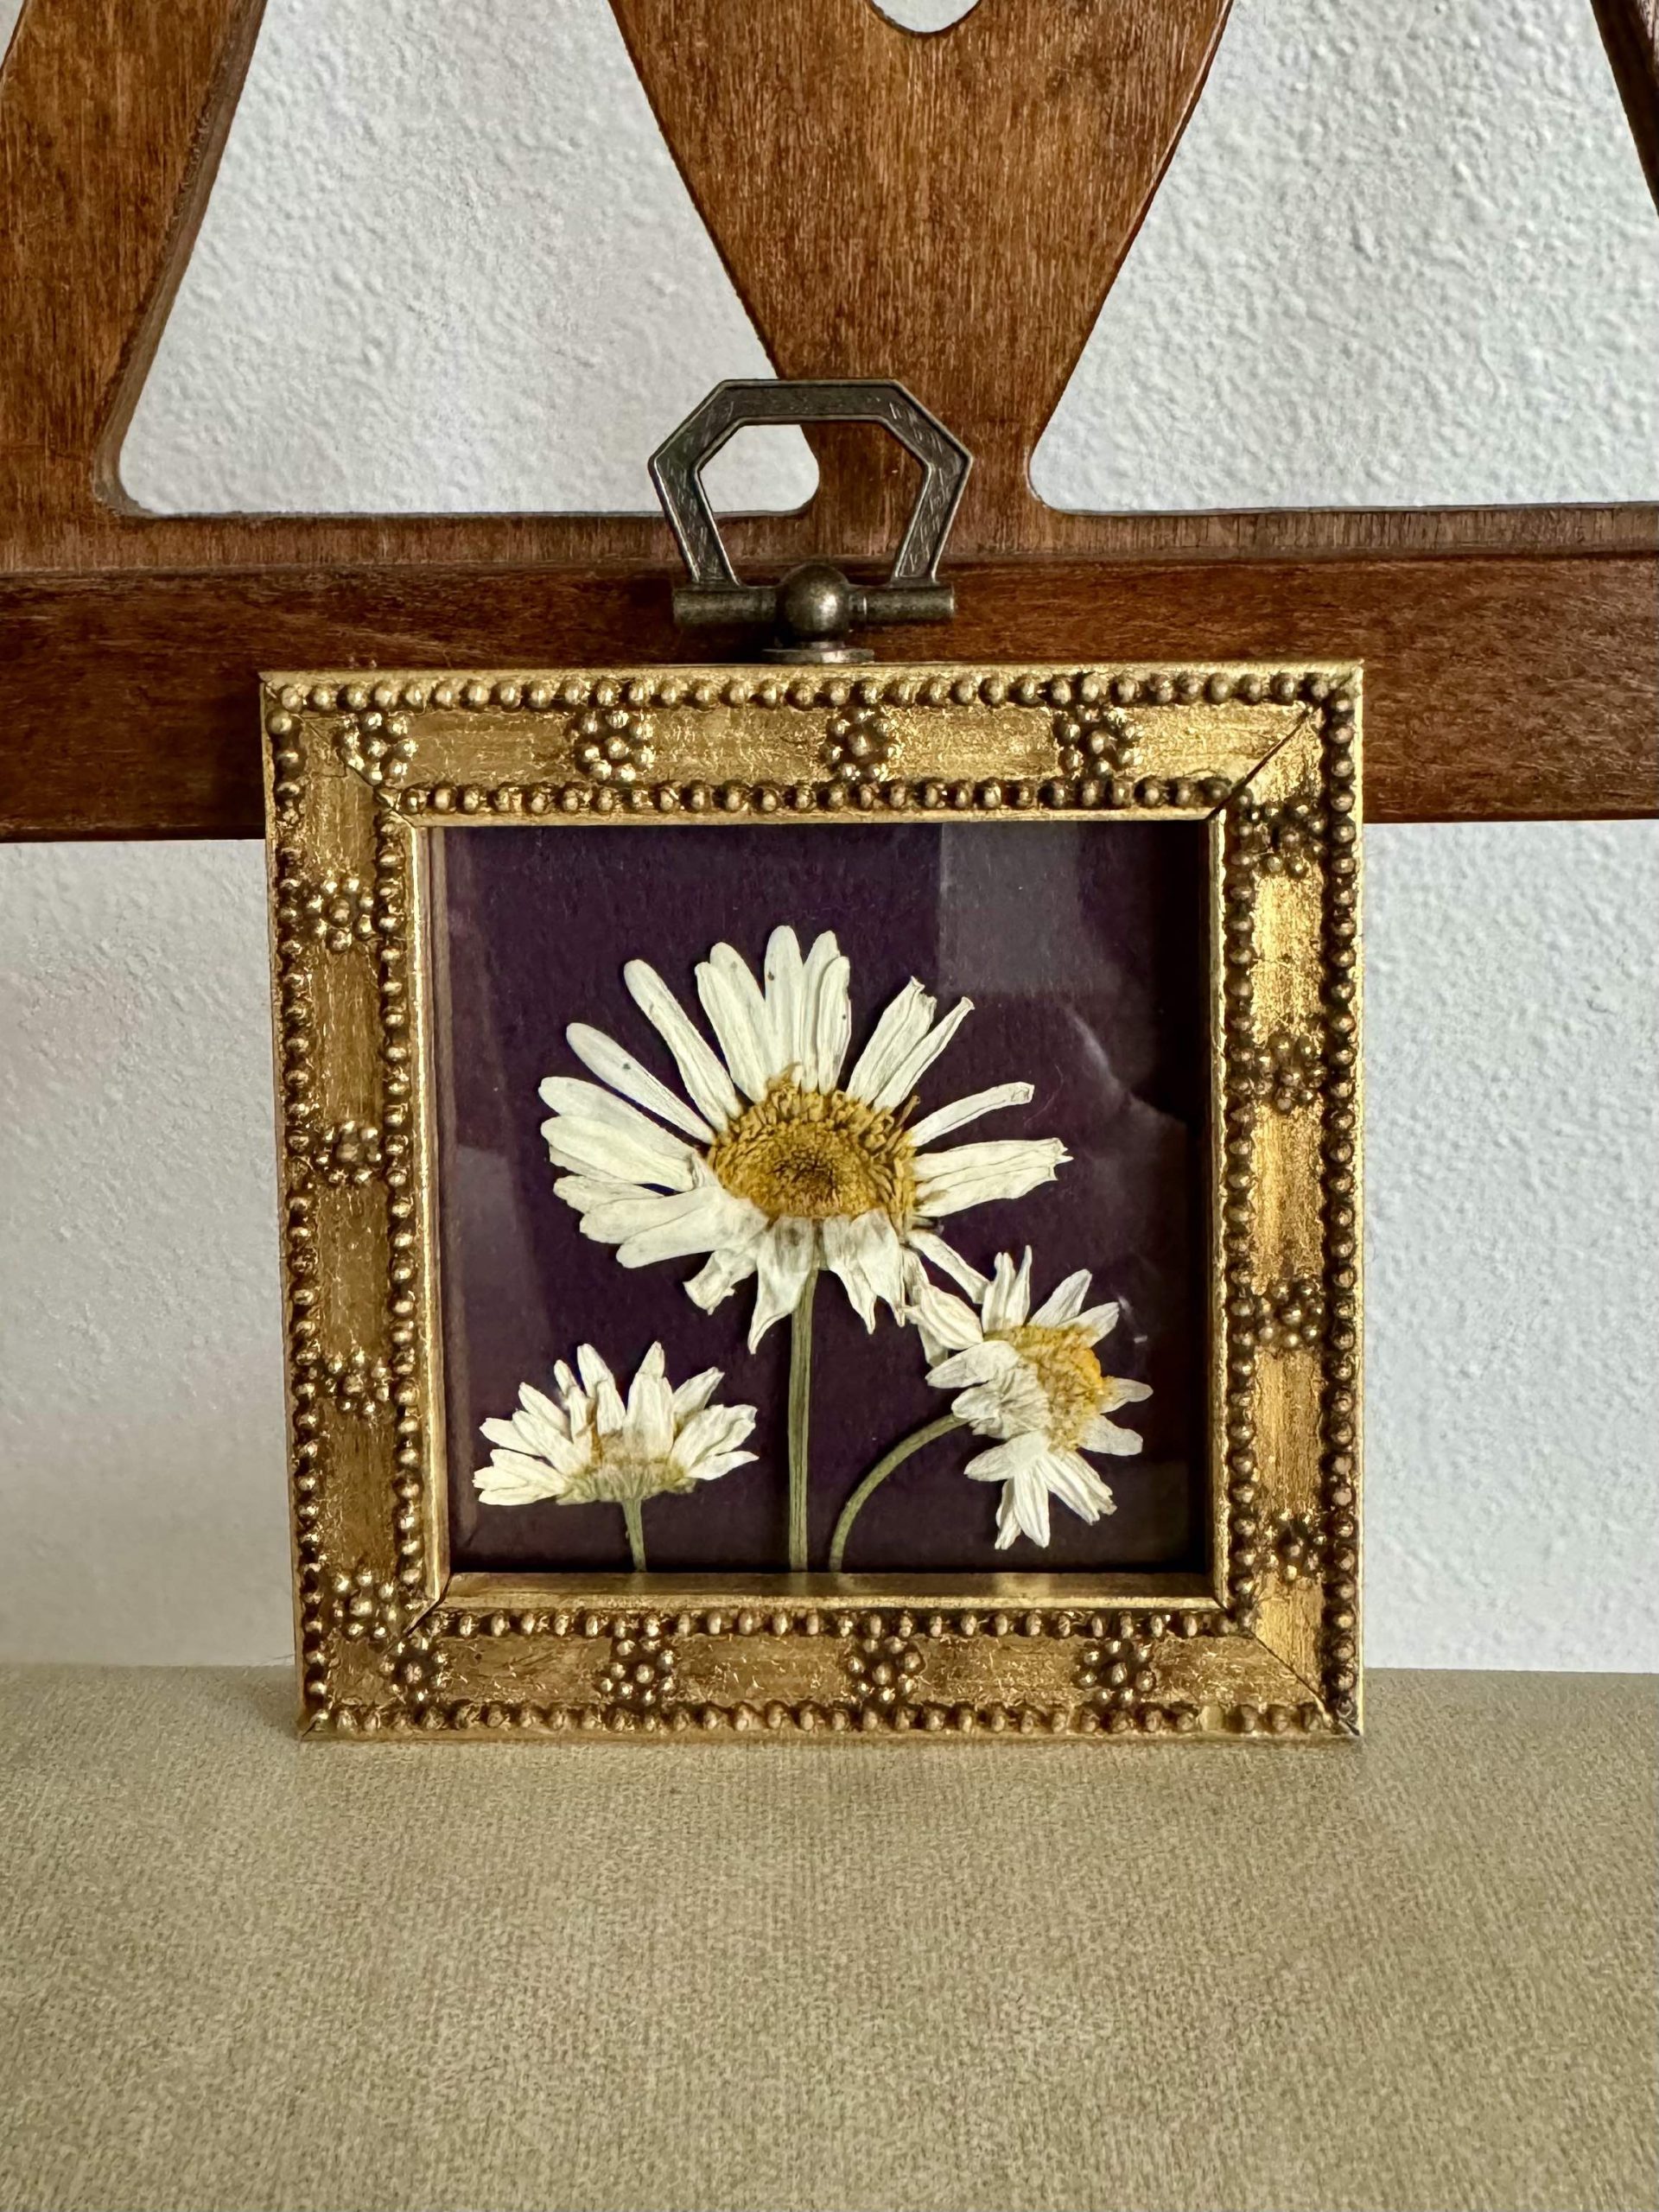 Three pressed white daisy flowers in a square gold vintage frame by Kindness Roots